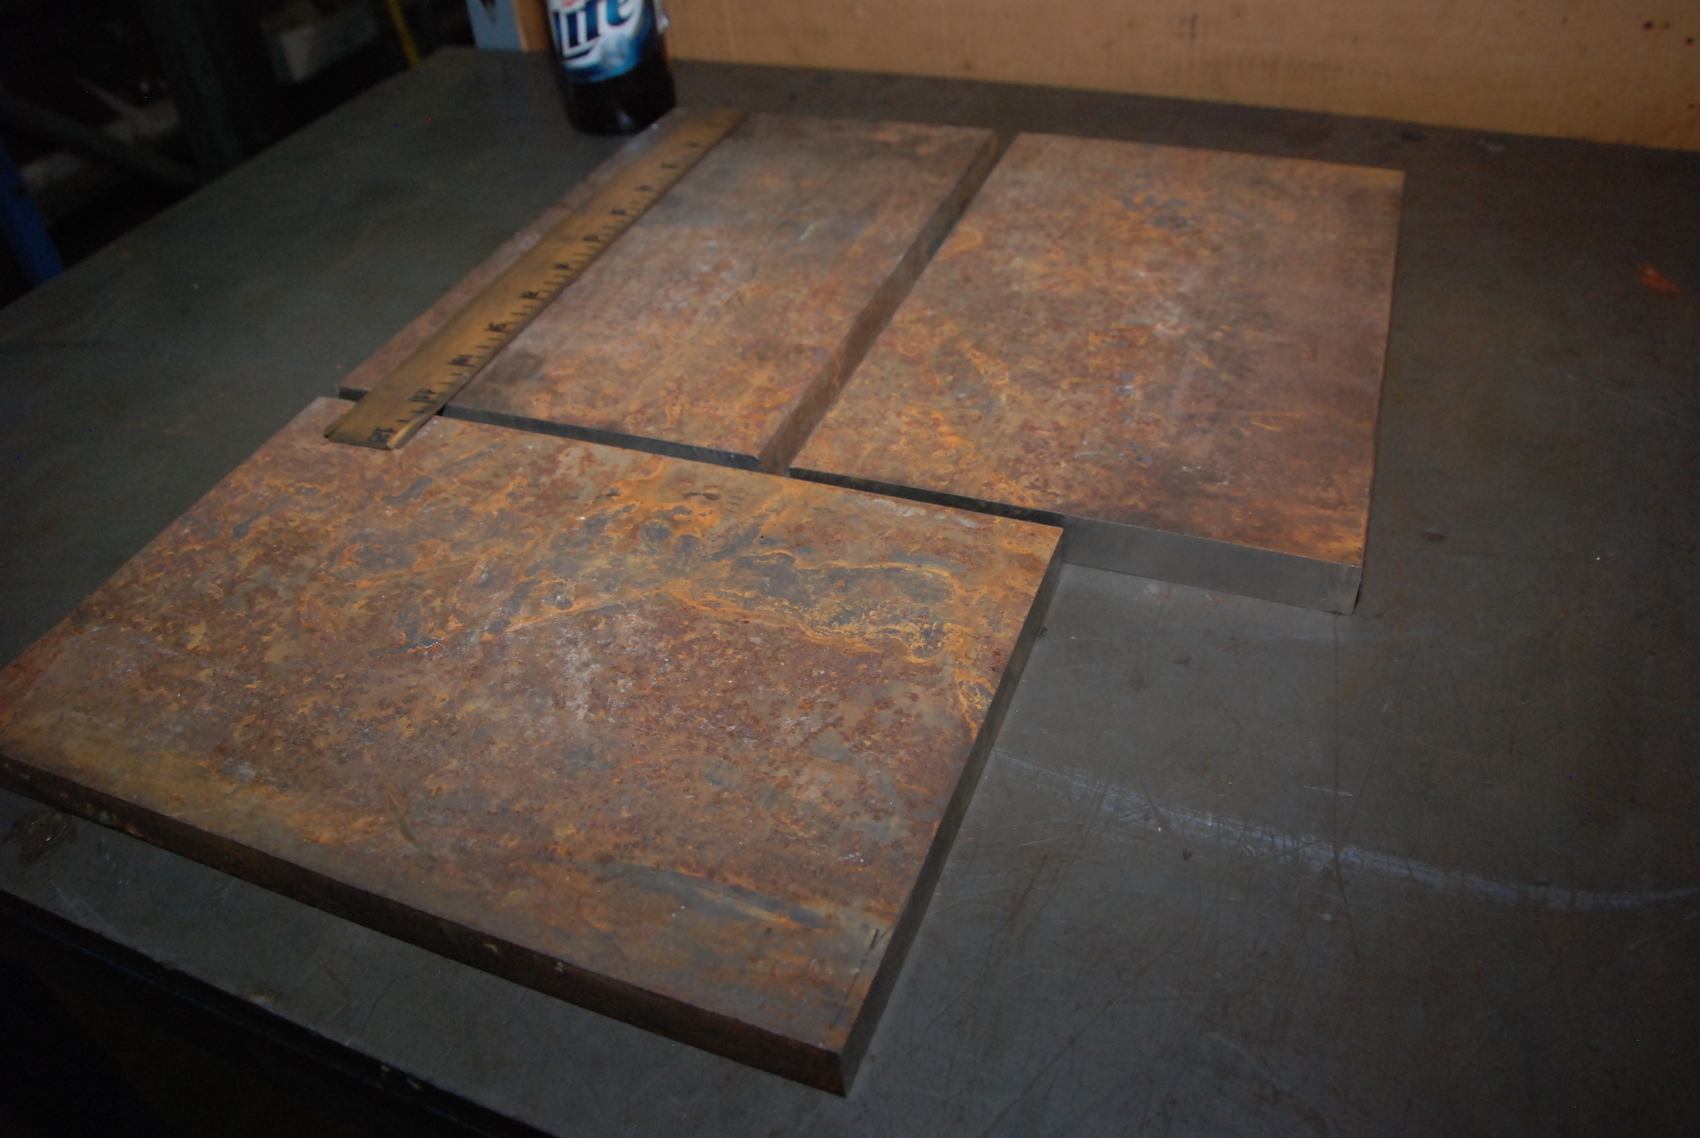 Lot of 3 steel Plate for blacksmith anvil,48.2 lbs,11x7x3/4"